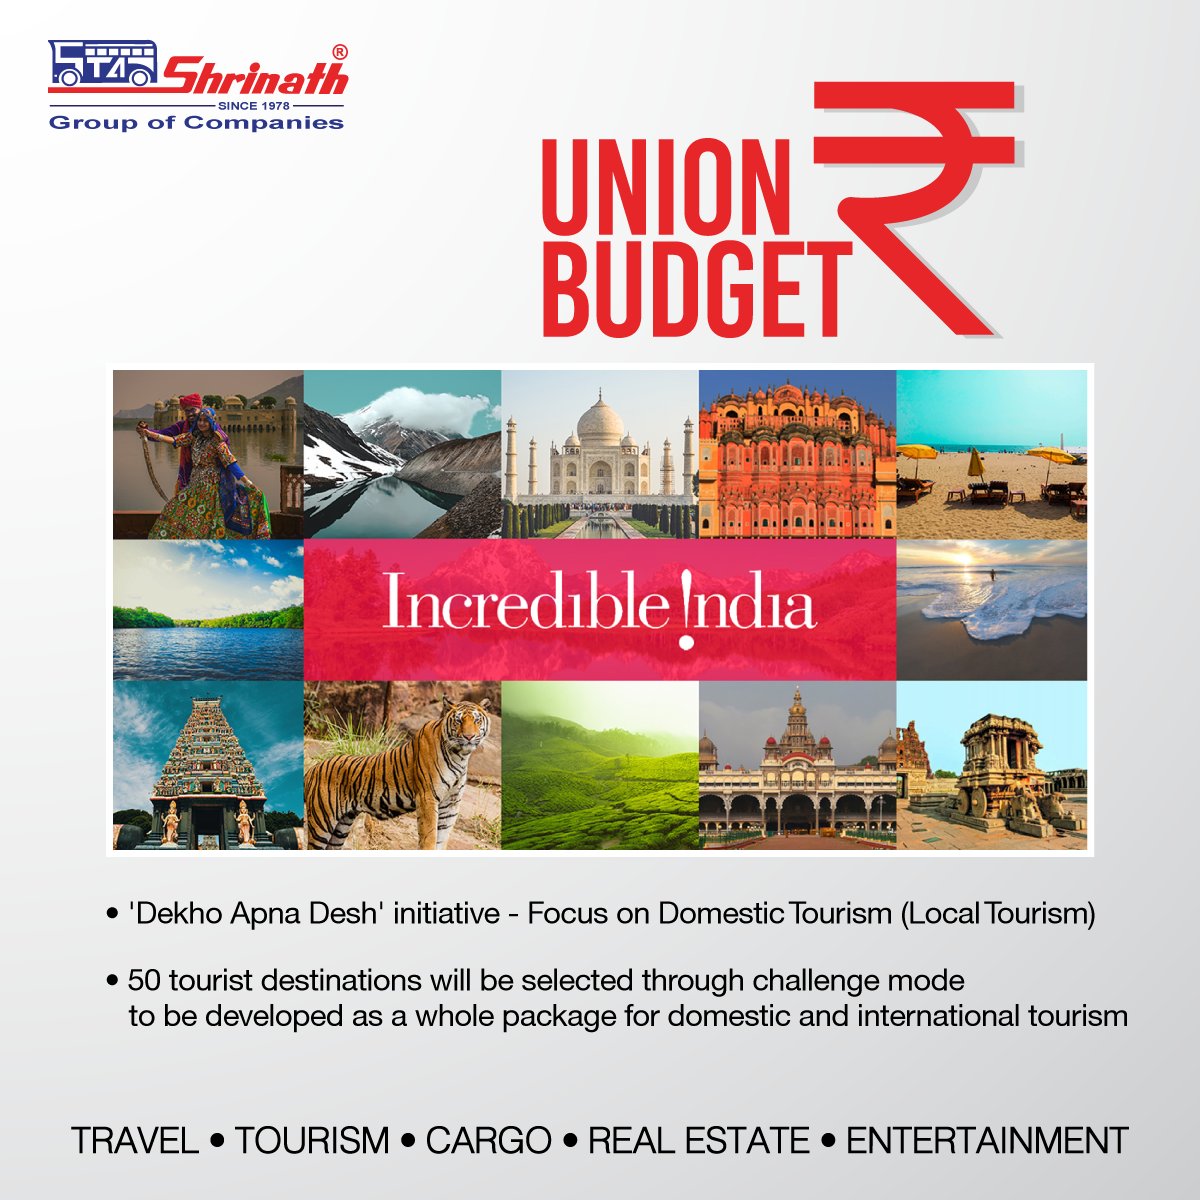 #Budget2023 #KeyPoints #Tourism

Few #Highlights from the #UnionBudget Presented by our Finance Minister -  Honourable Nirmala Sitharaman on 1 Feb 2023

#UnionBudget2023 #LatestNews #India #shrinathgroupofcompanies #shrinathtravels #shrinathtourism #shrinathcargo